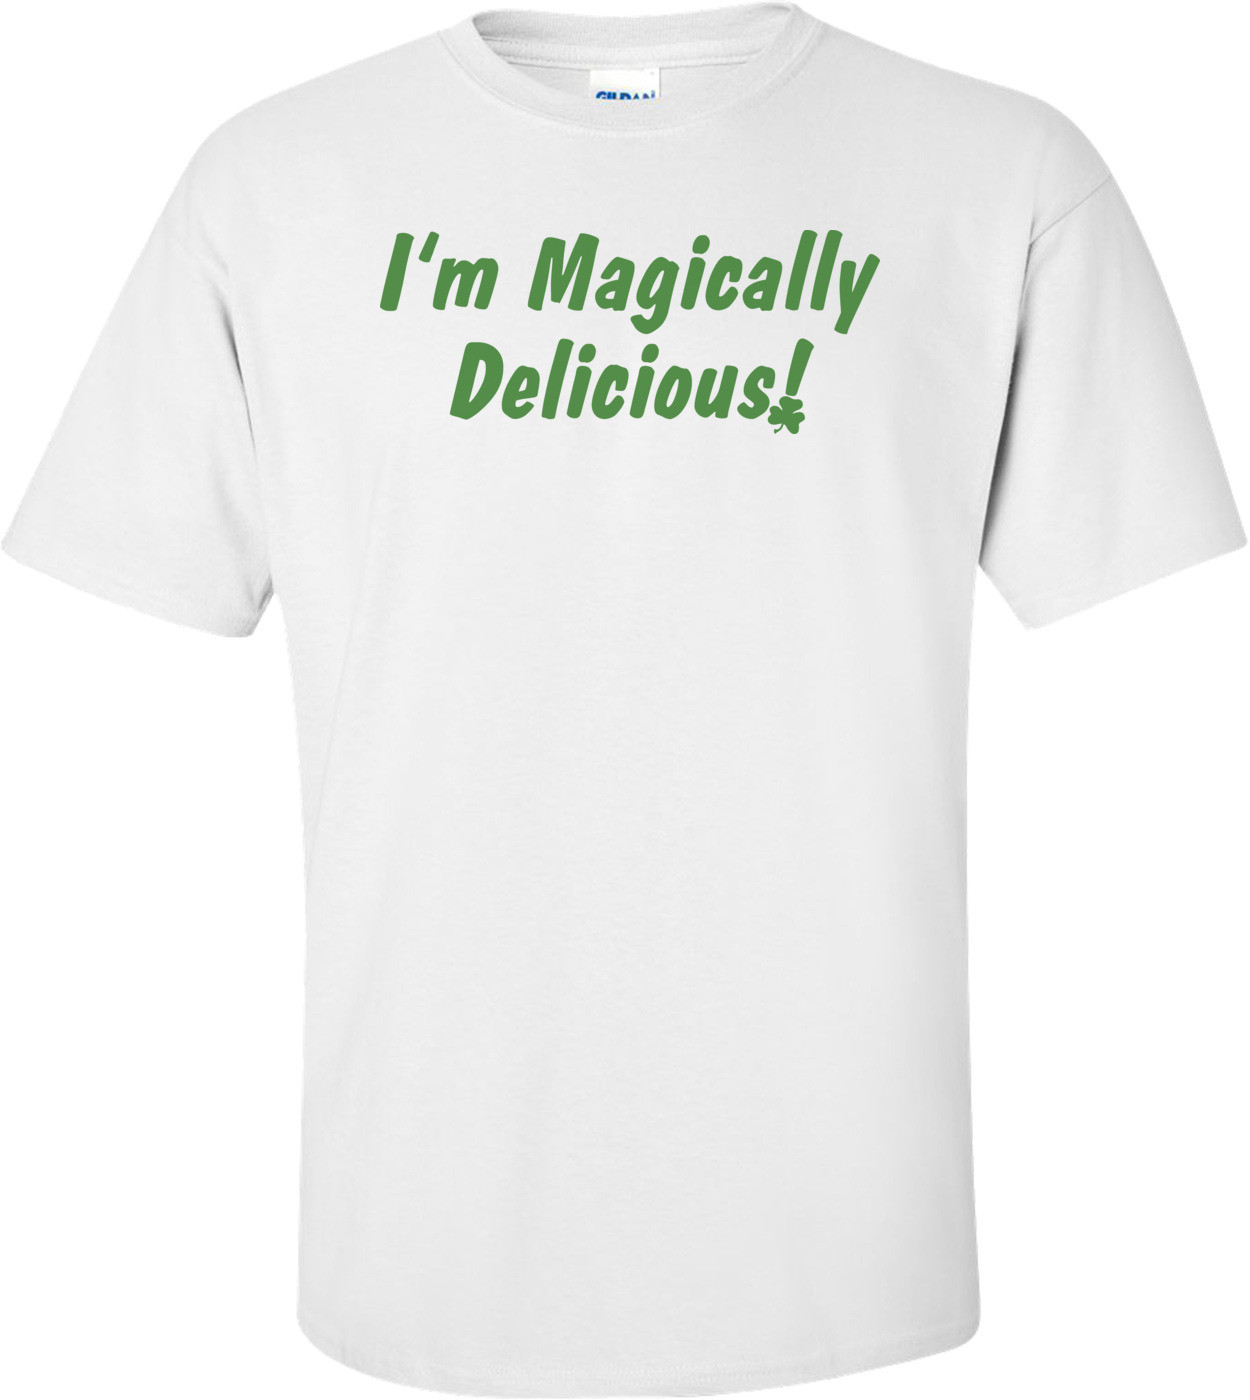 I'm Magically Delicious St. Paddy's Day T-shirt